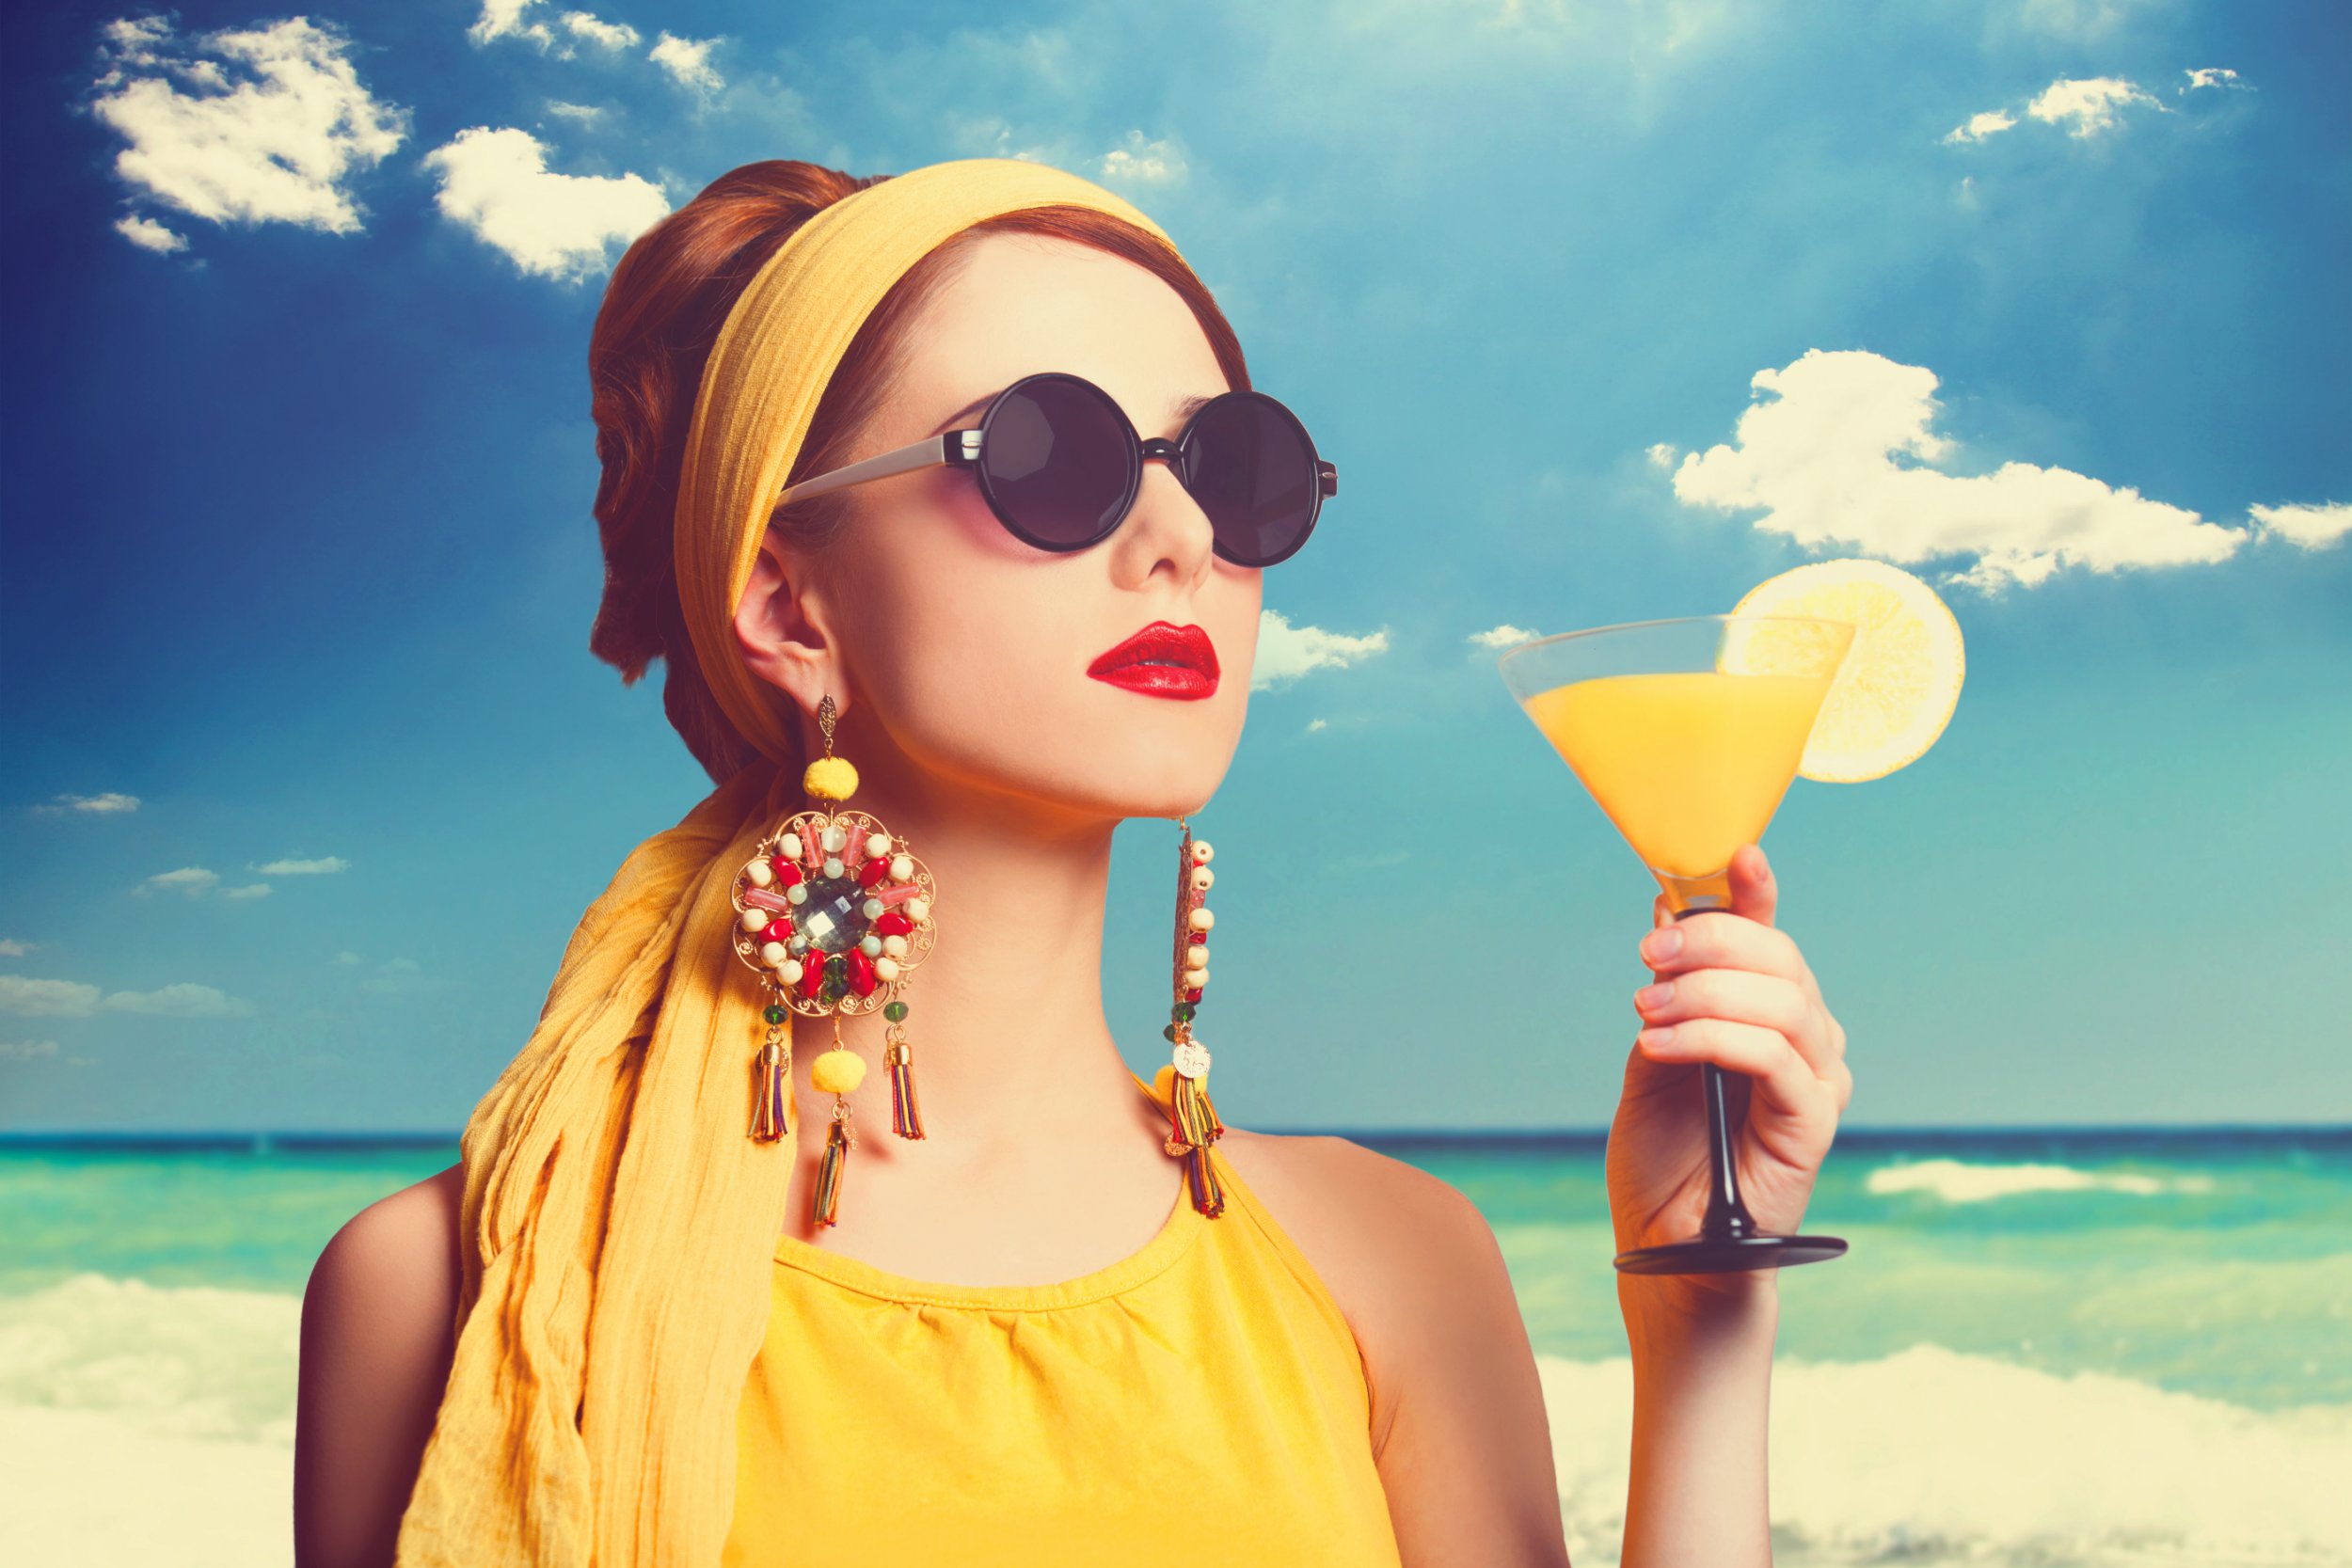 How to save money this summer: Top tips on how not to splurge while having fun in the sun